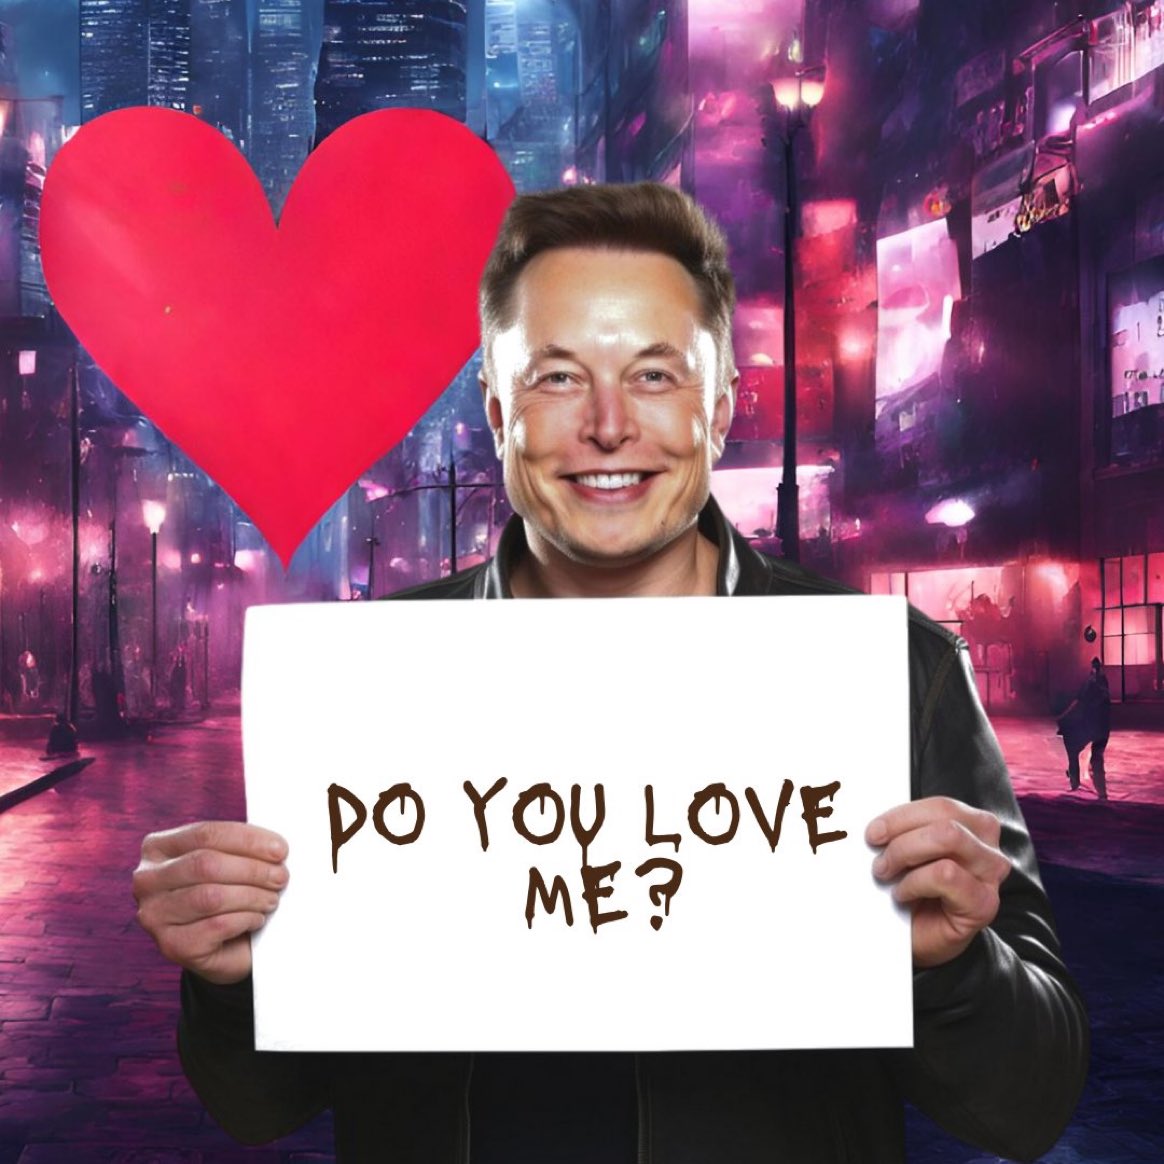 Do you really Love me?? 😻 don't forget repost. @elonmusk @EMusk_90 _90